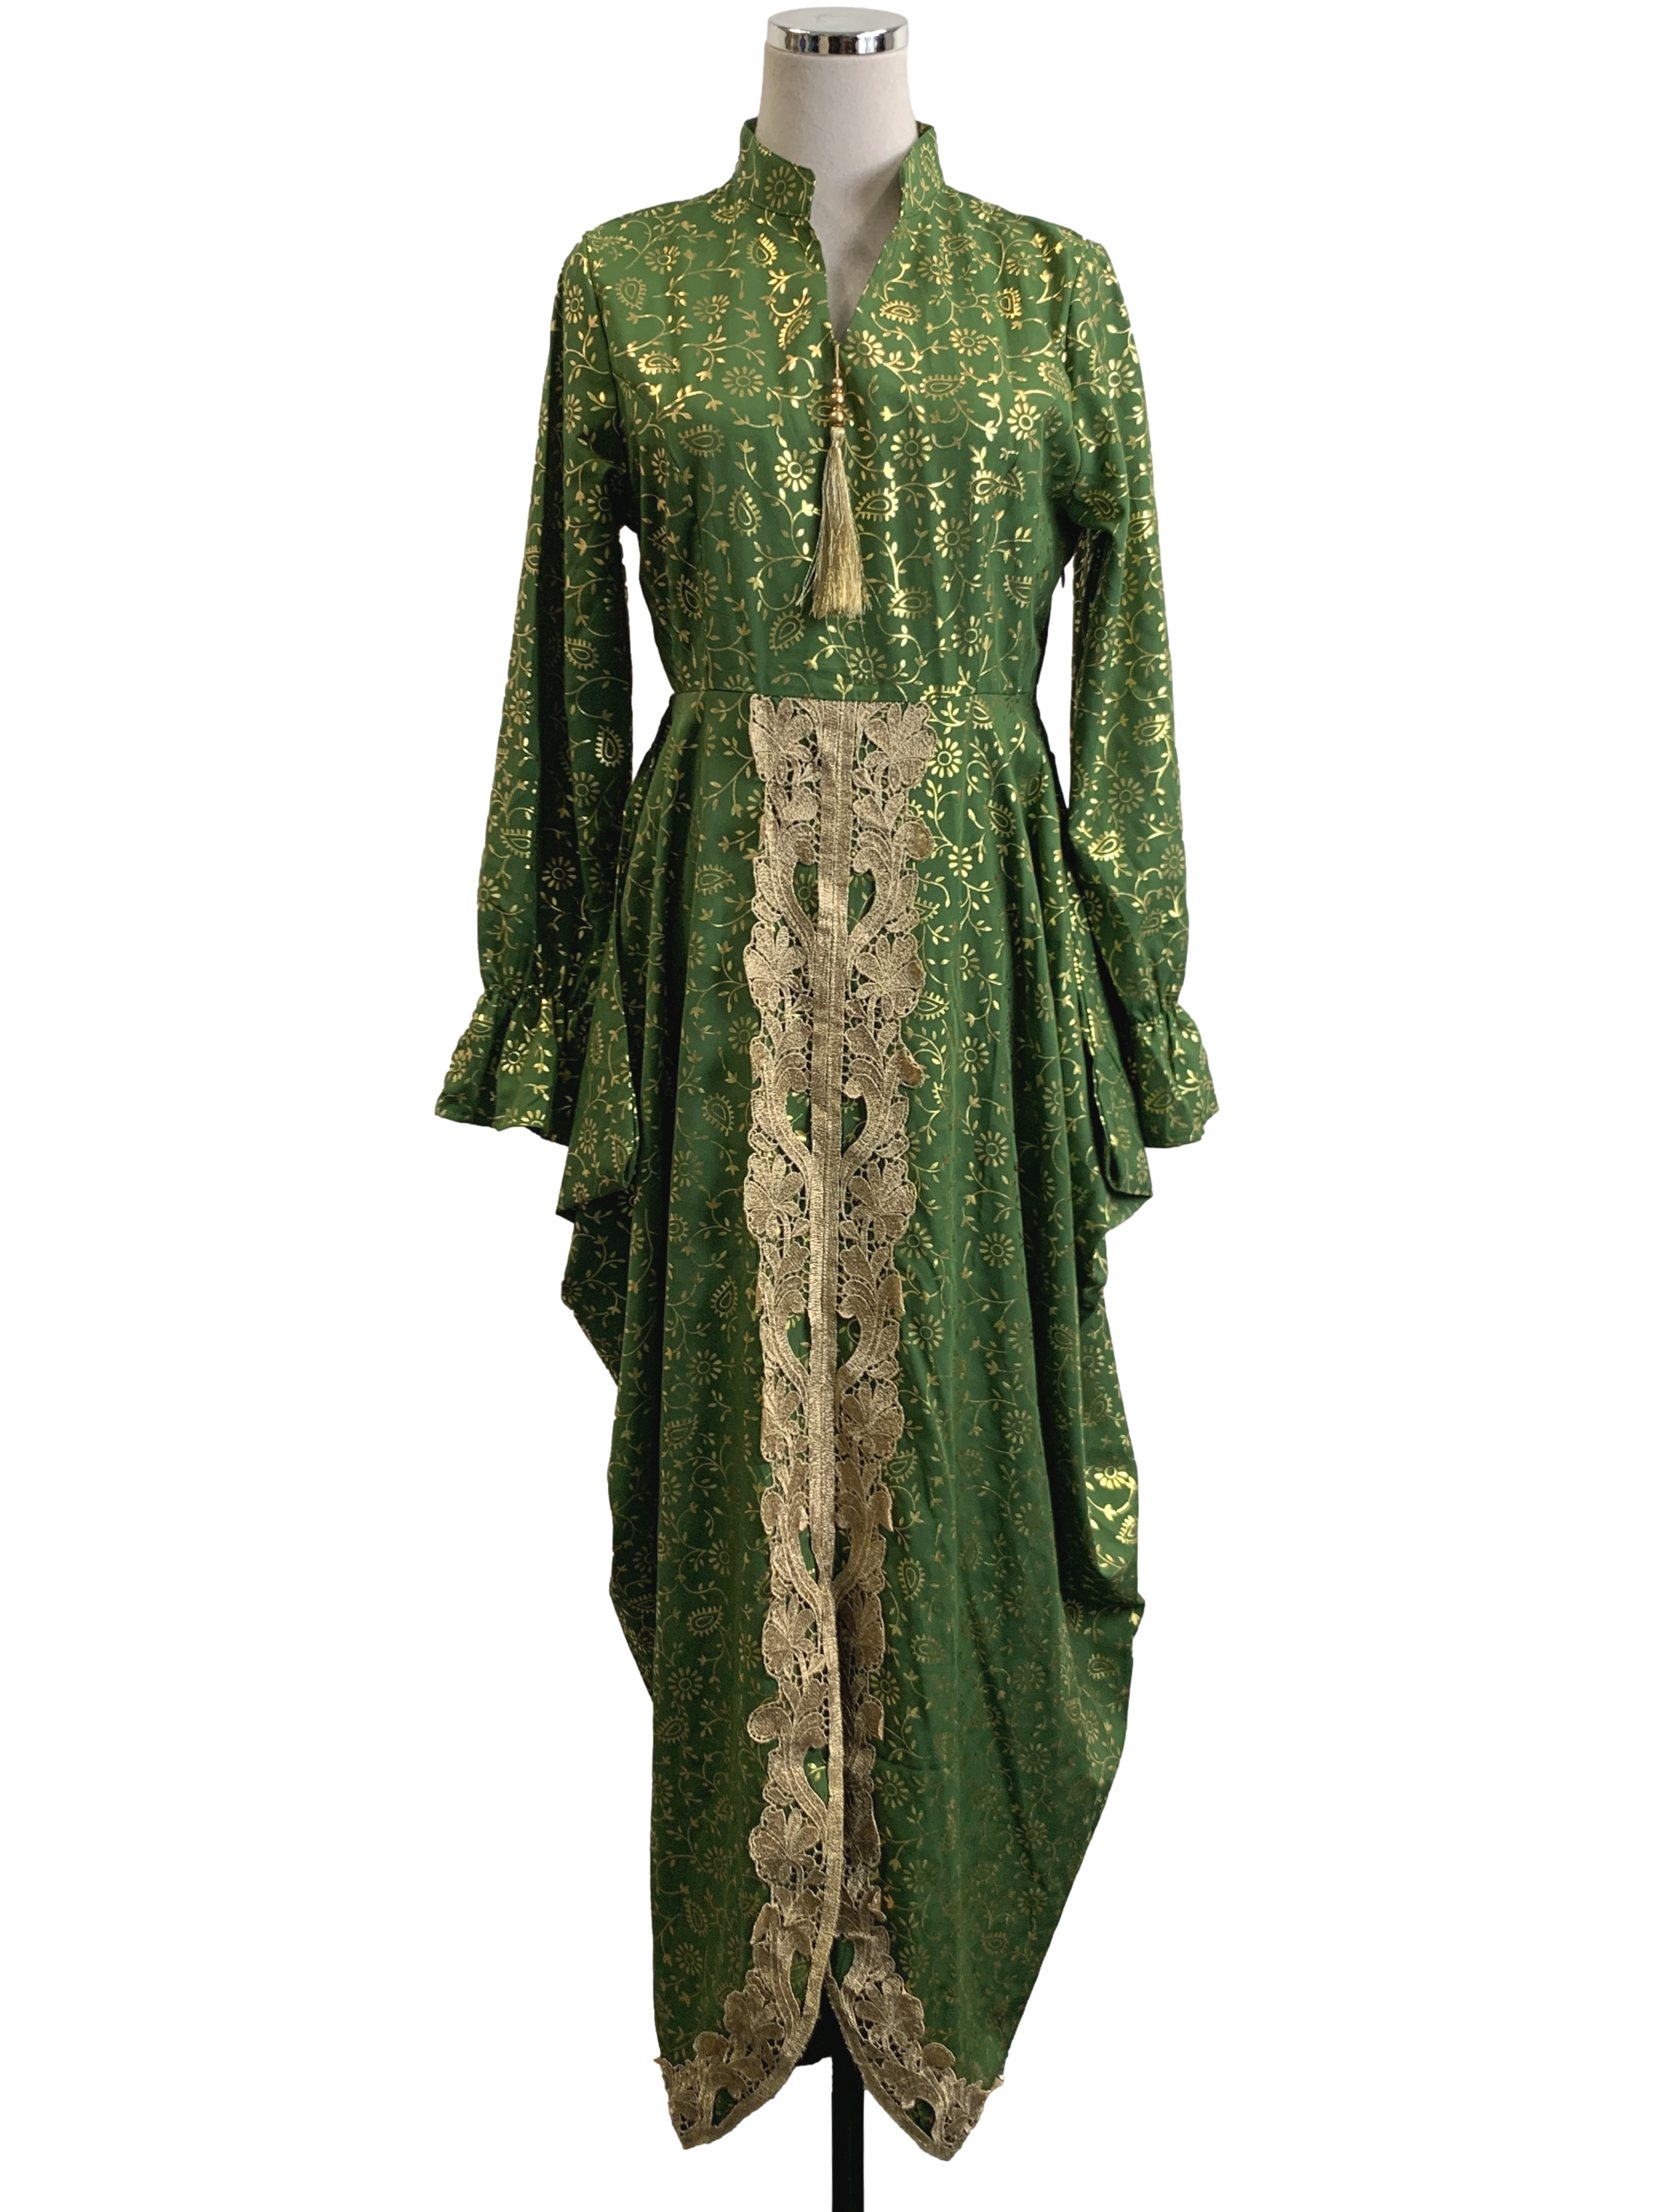 Pear Green And Gold Dress